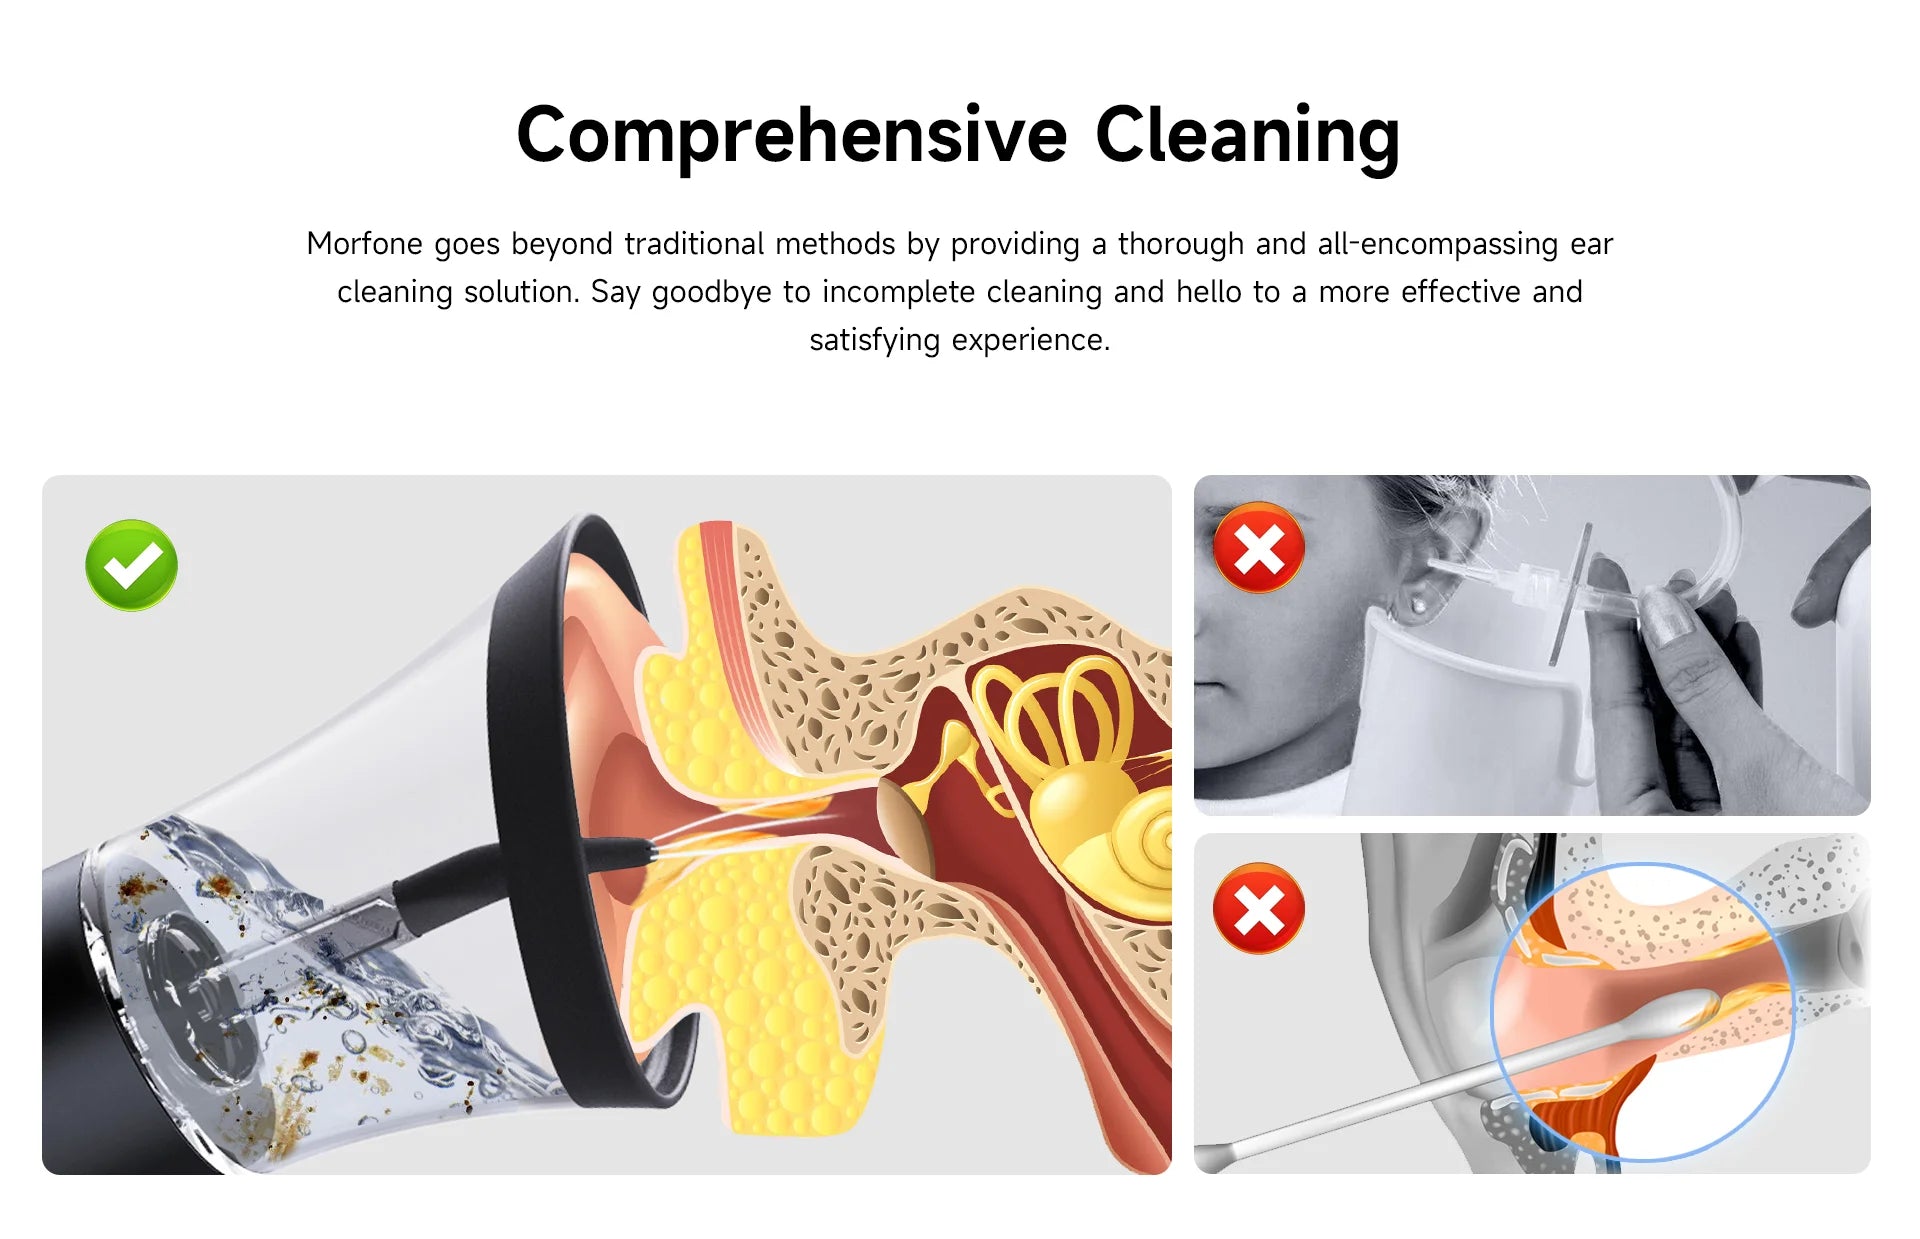 Comprehensive Cleaning with Morfone - Say goodbye to incomplete ear cleaning with our thorough solution.